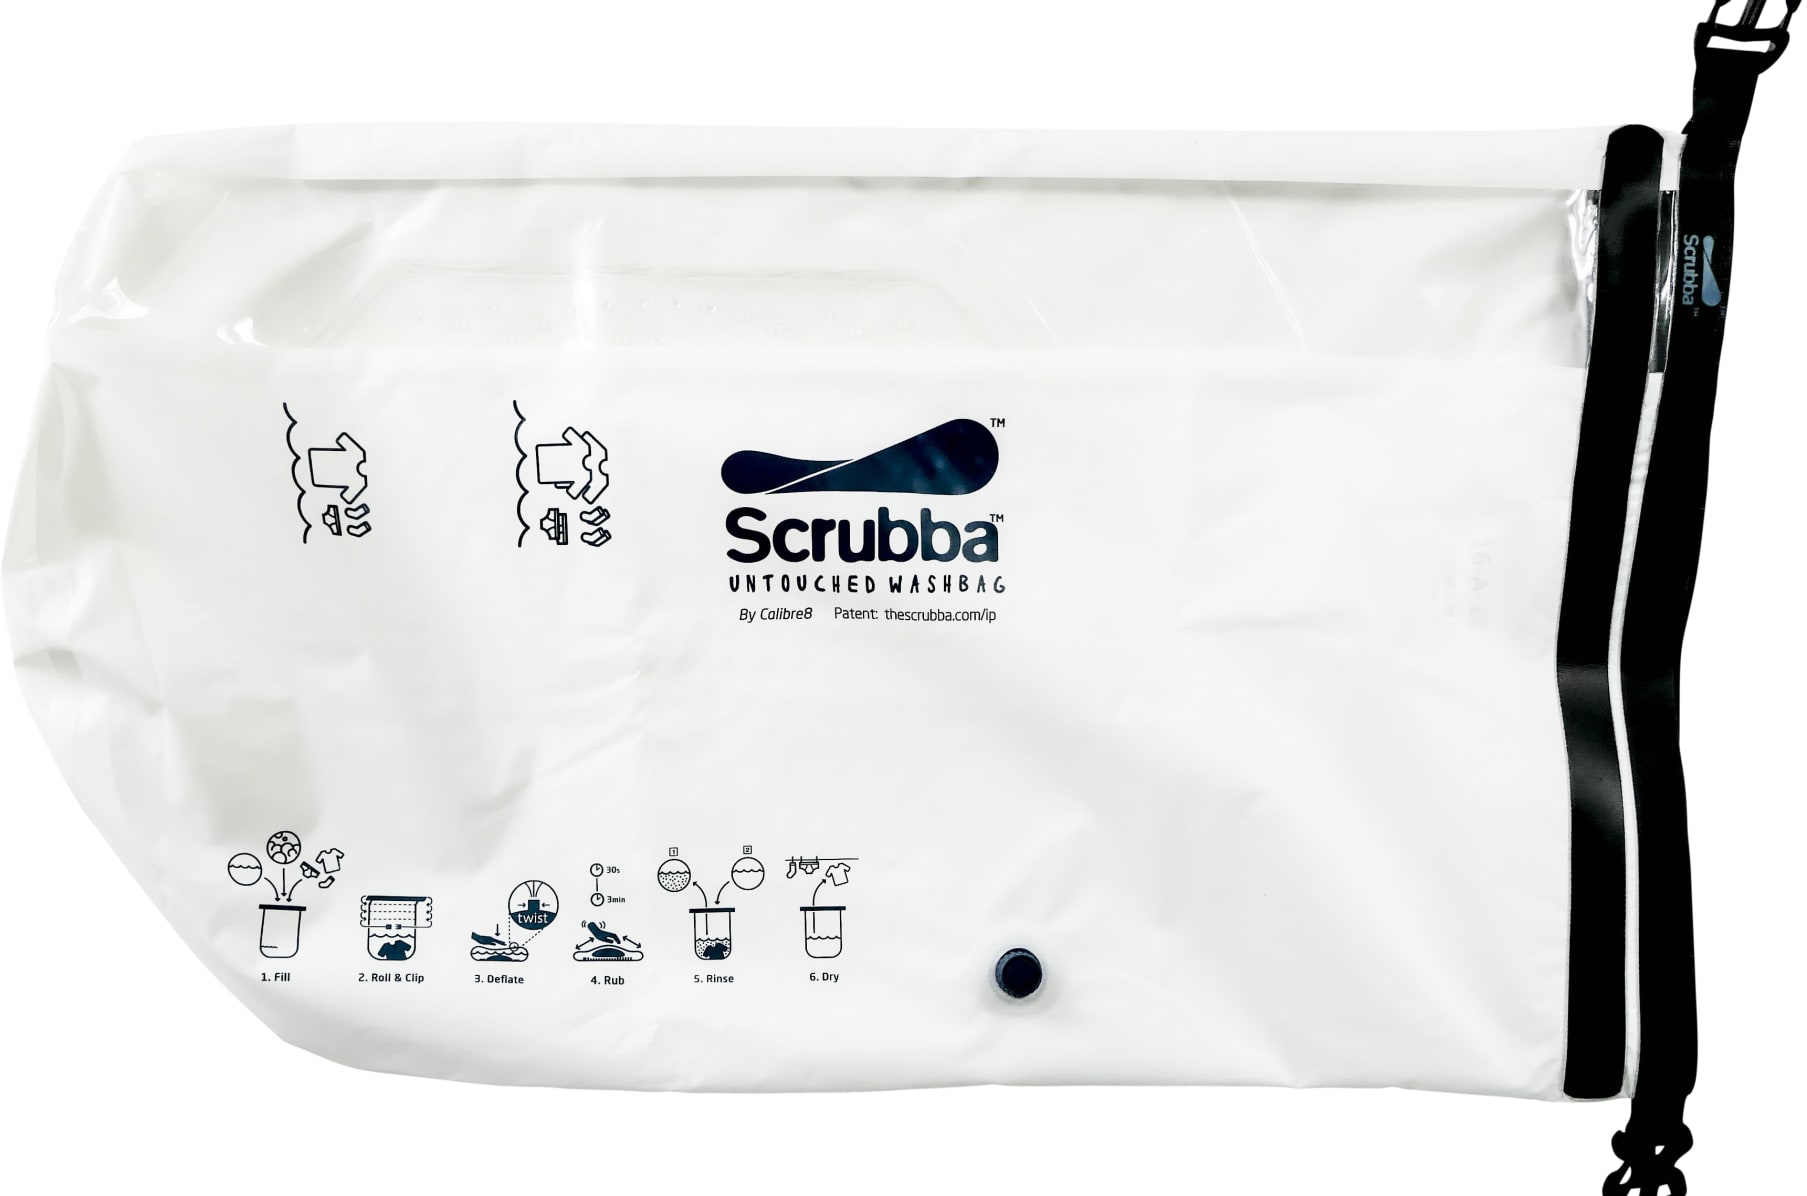 The Scrubba Wash Bag - A good way to fold the Scrubba wash bag for